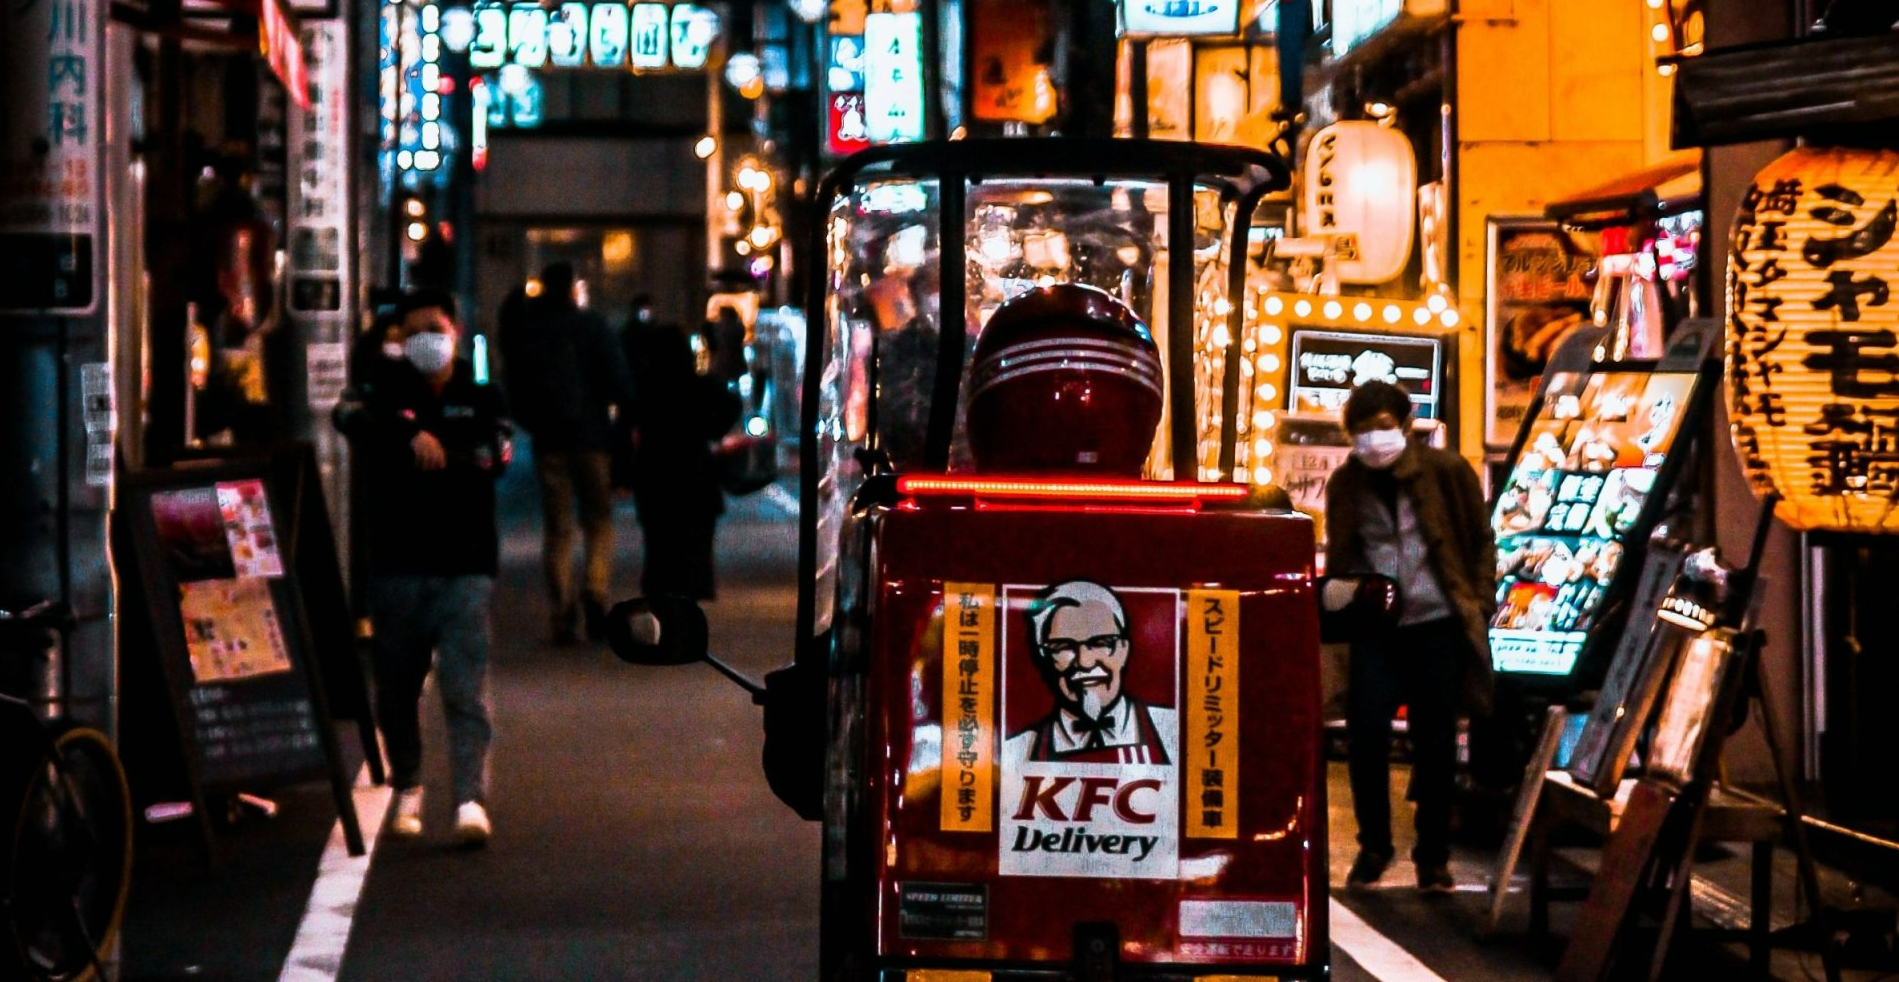 a kfc delivery truck is parked on the street